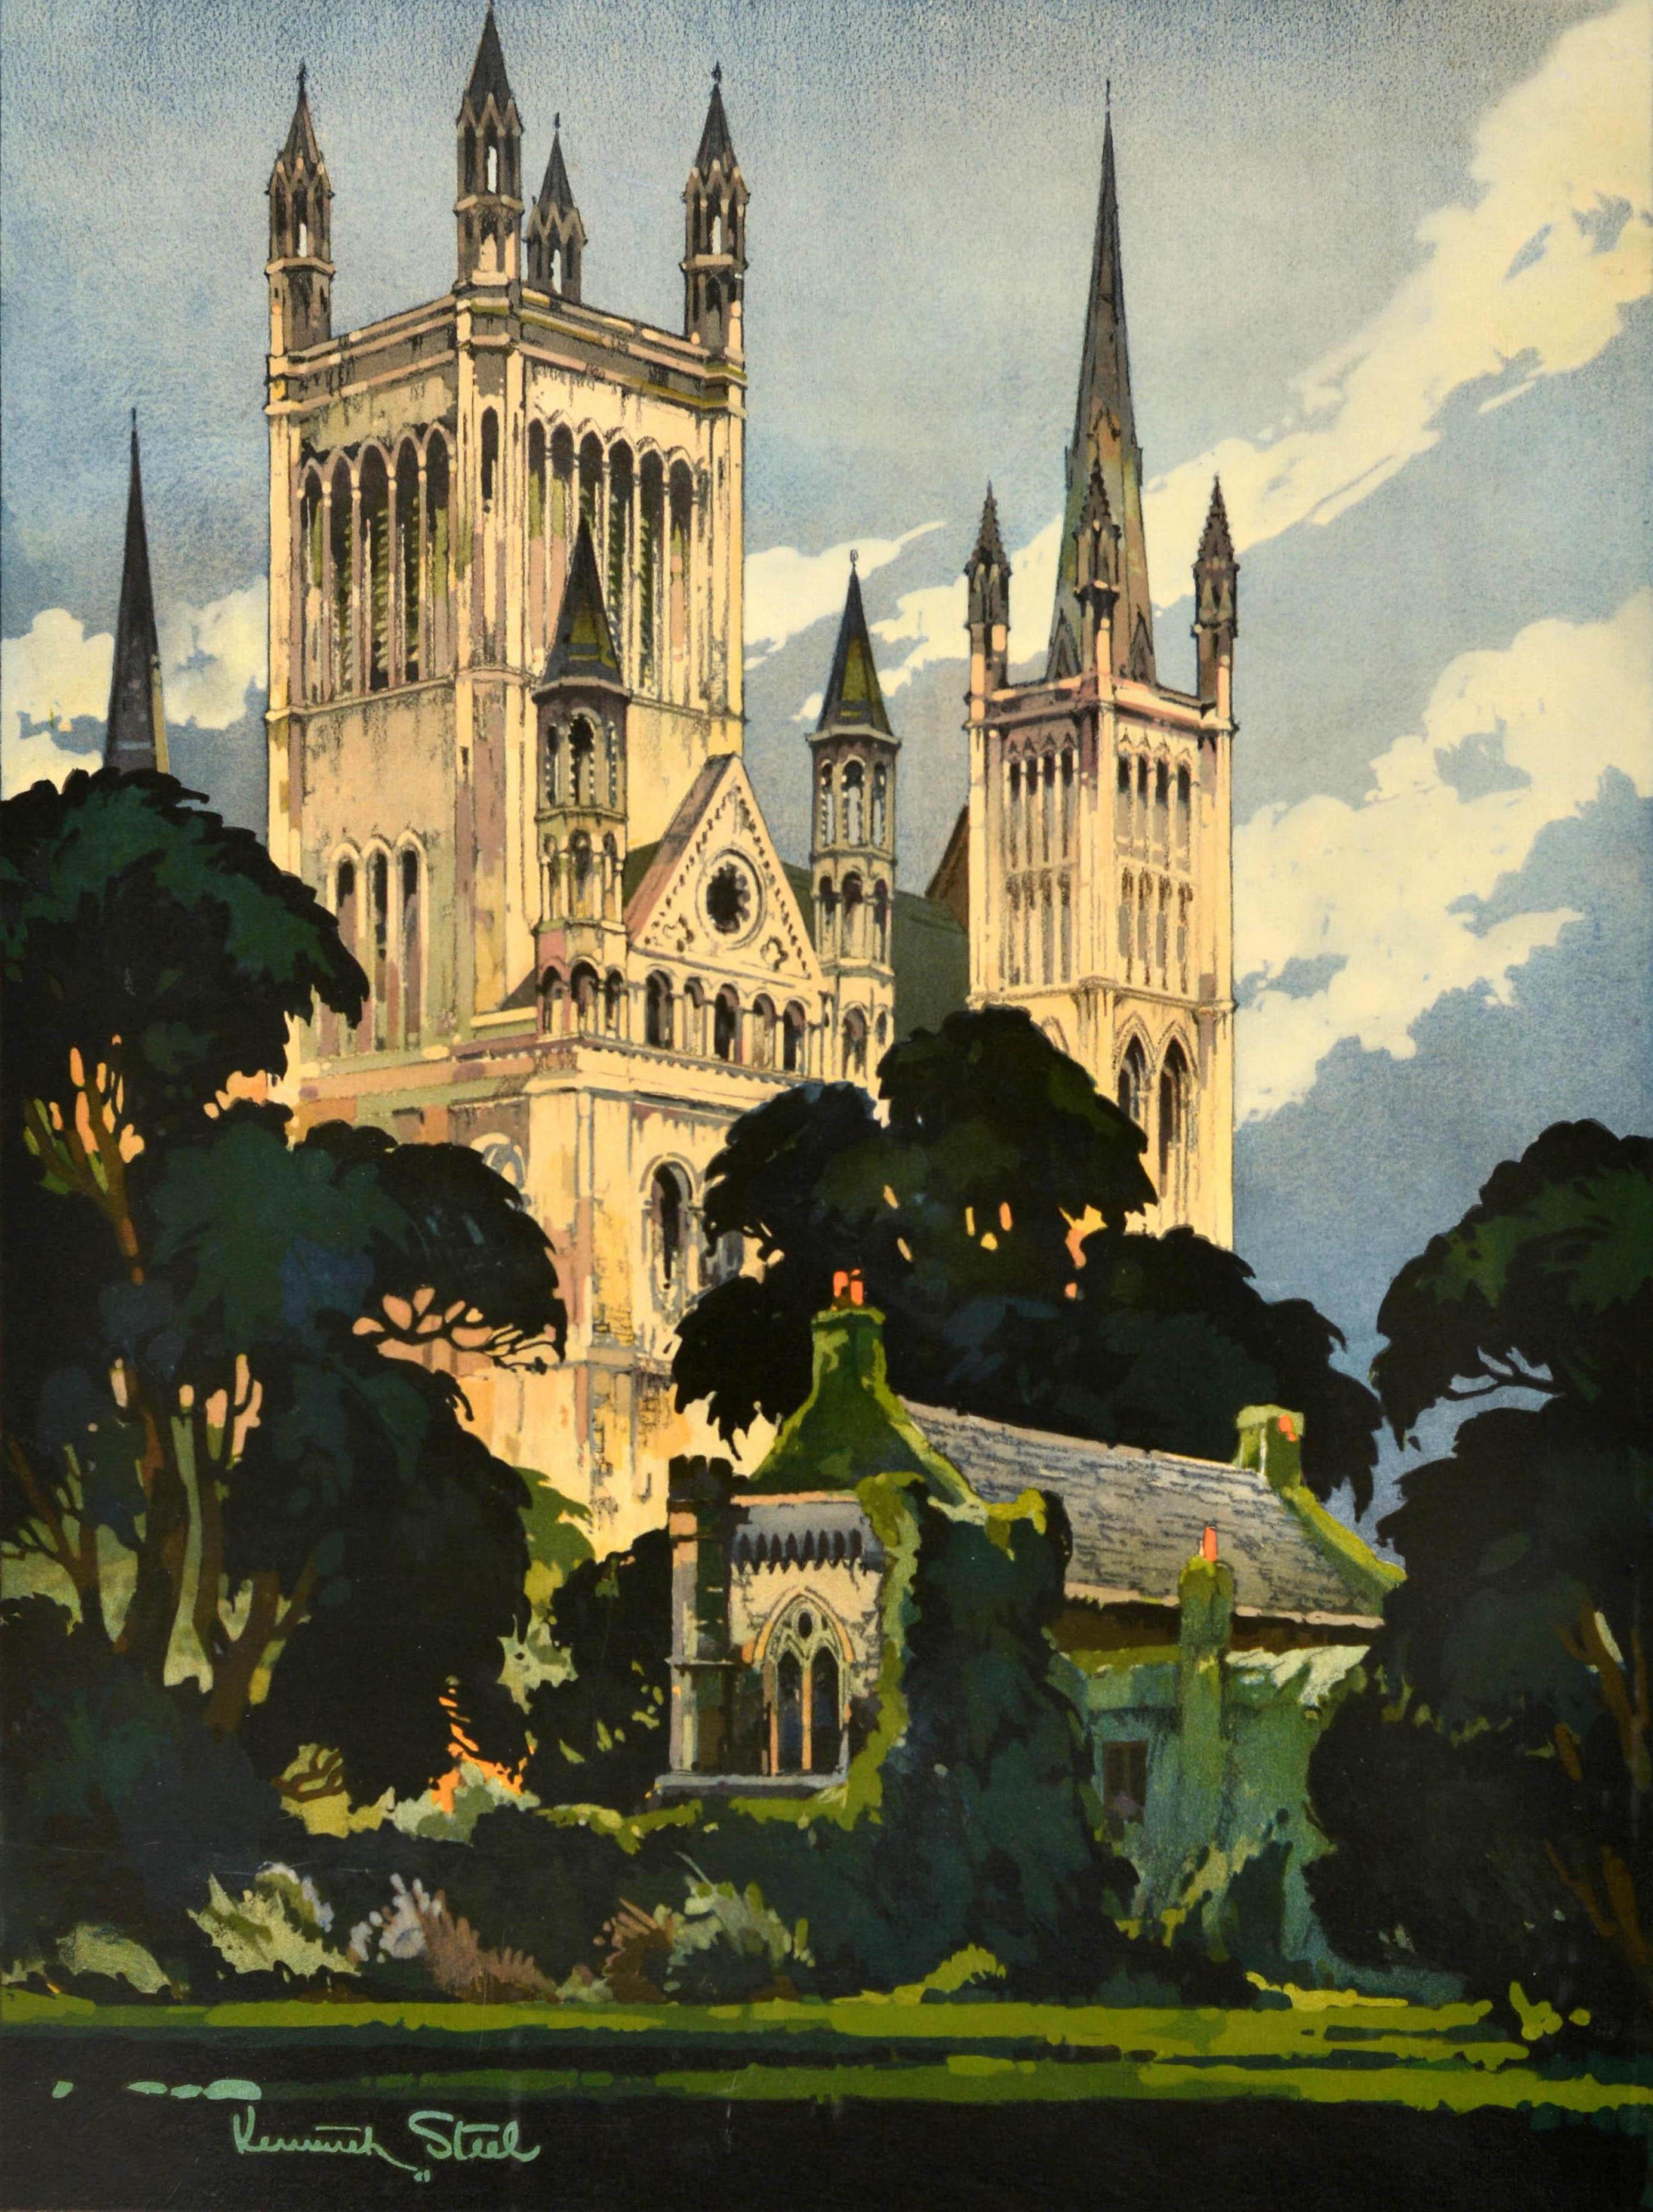 Original vintage travel advertising poster - Peterborough See Britain by Train British Railways - featuring a great scenic view by Kenneth Steel (1906-1970) of The Cathedral and Deanery with green trees in the foreground, the text and British